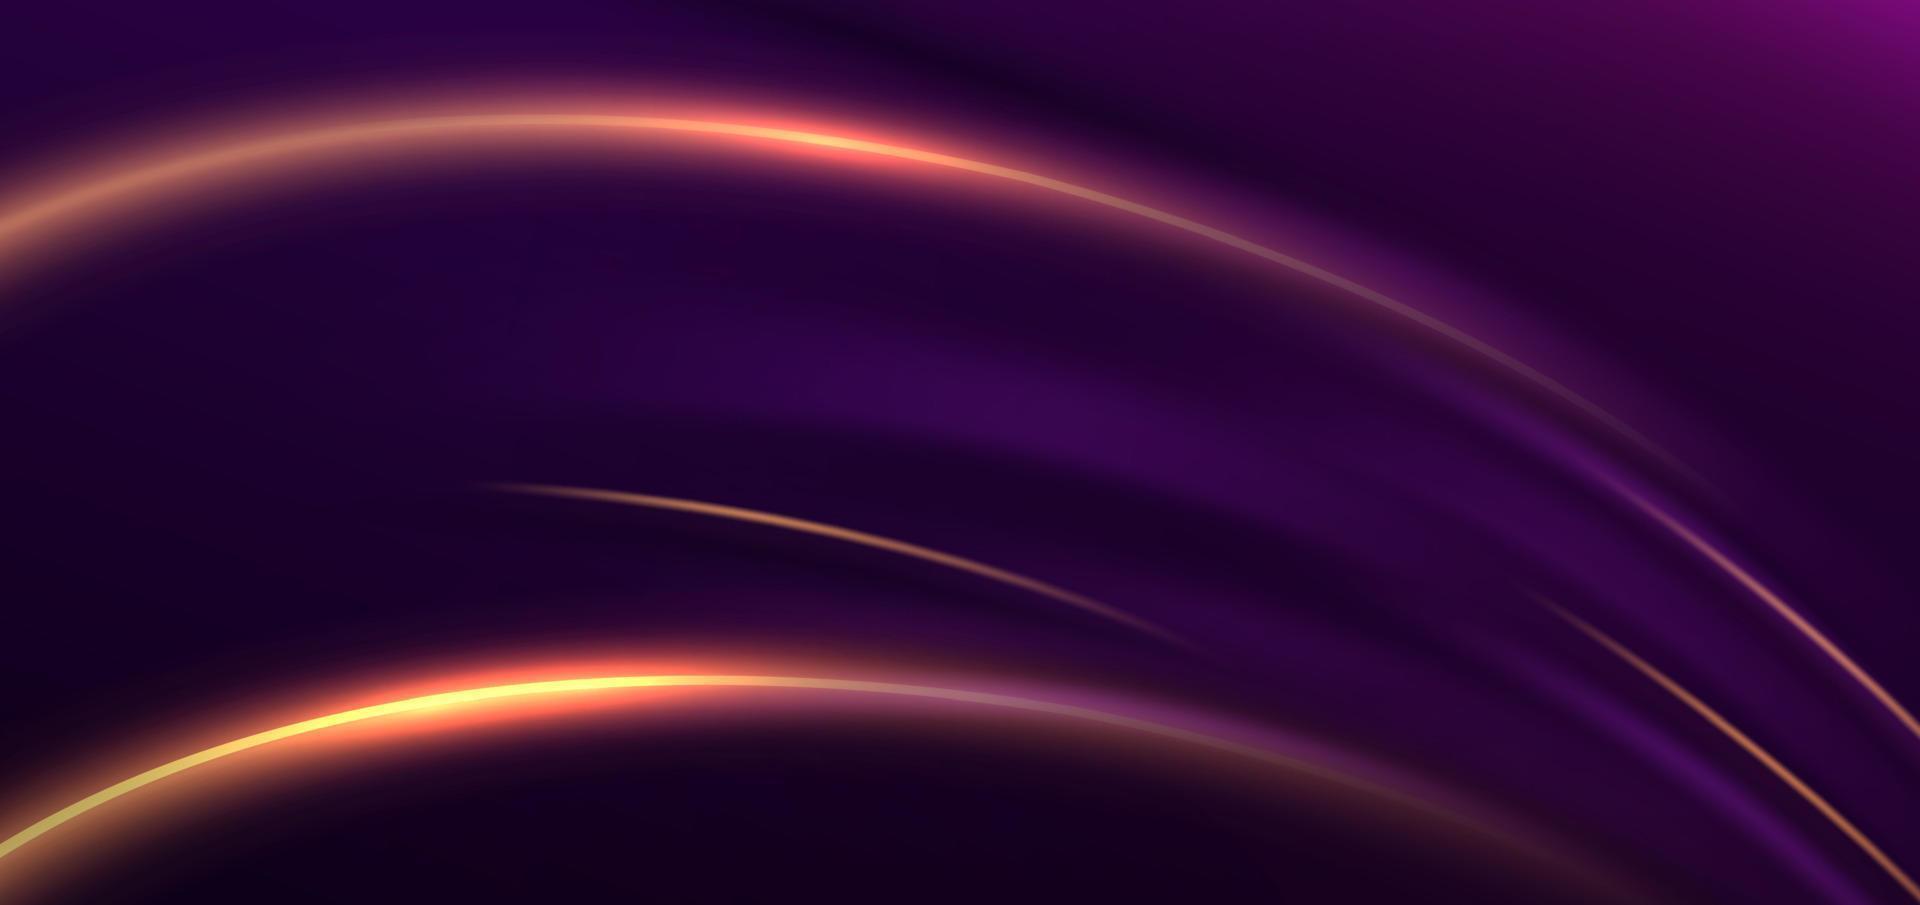 Abstract glowing gold curved lines on dark purple background with lighting effect and sparkle with copy space for text. Luxury design style. vector